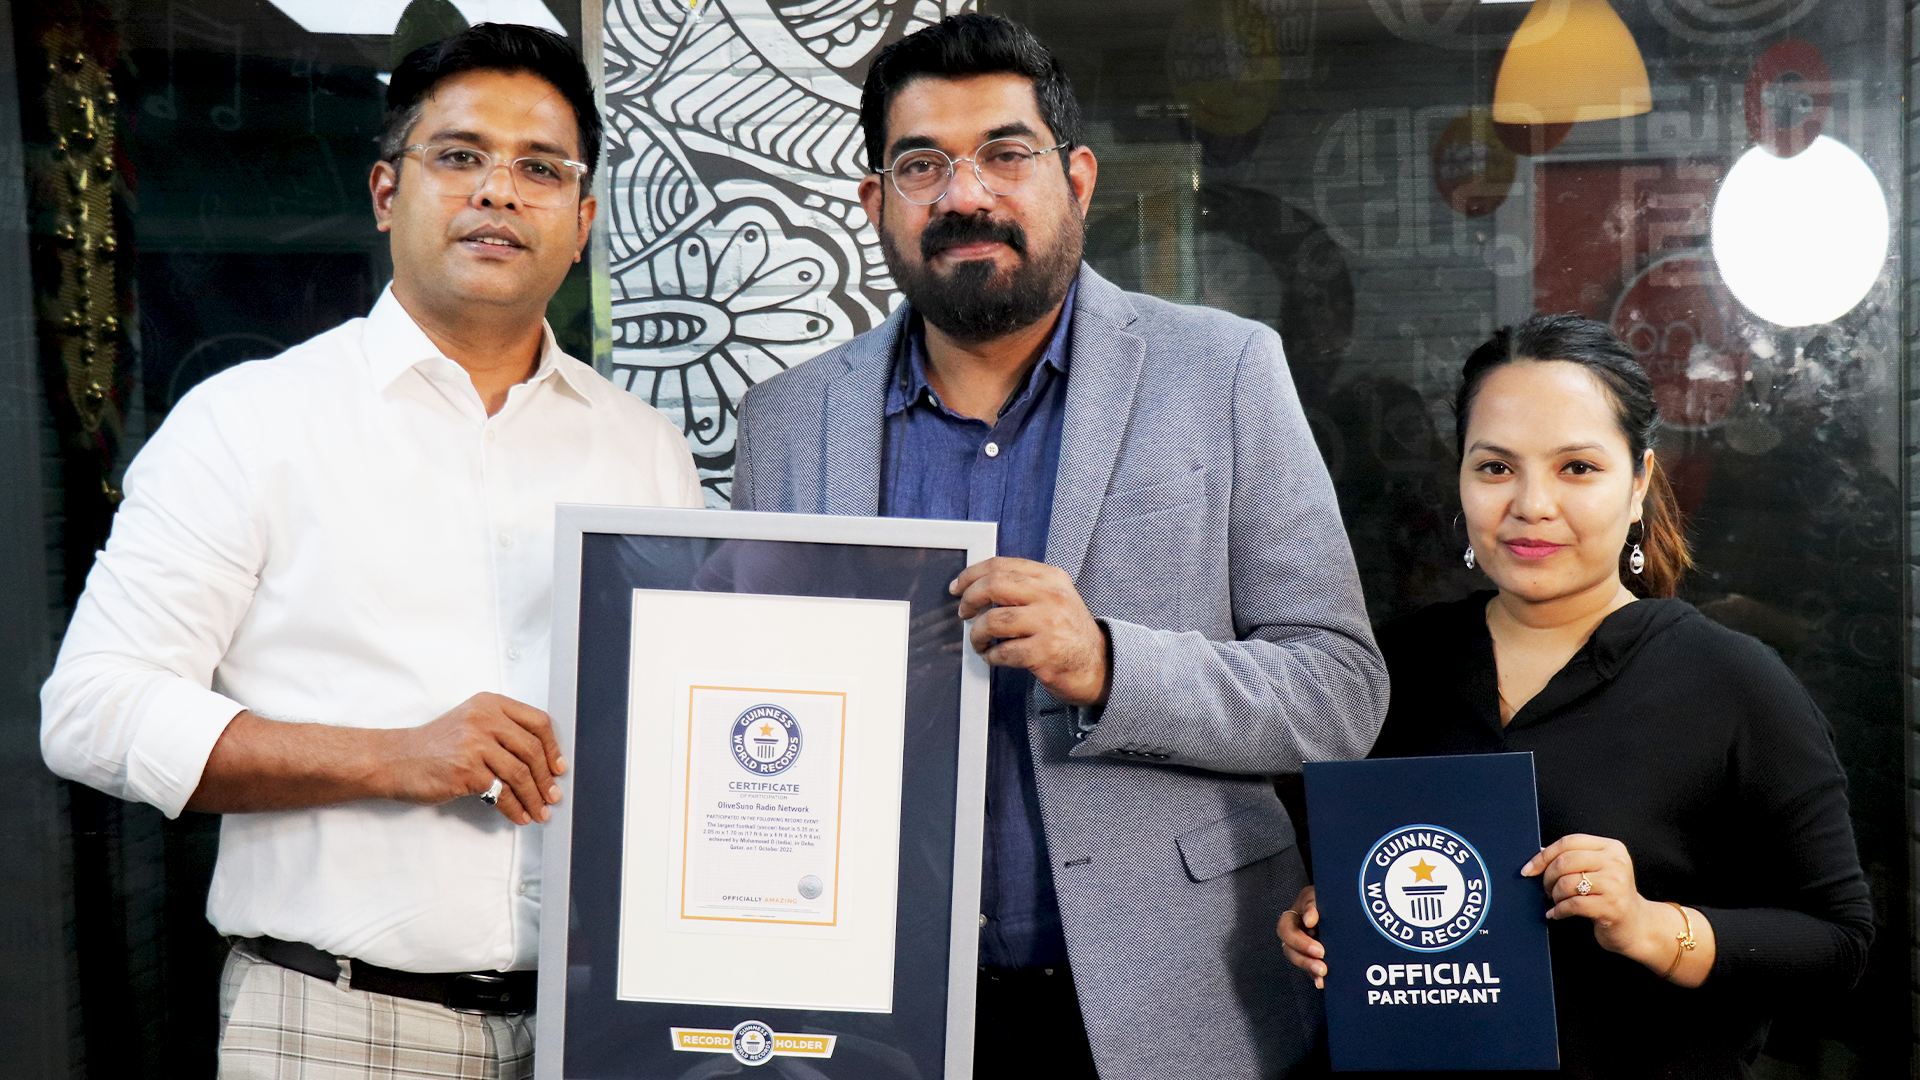 Olive Suno Radio Network and Focus International Group have stepped up the game and made history with a Guinness World Record for creating the Largest Soccer Boot Ever Made!